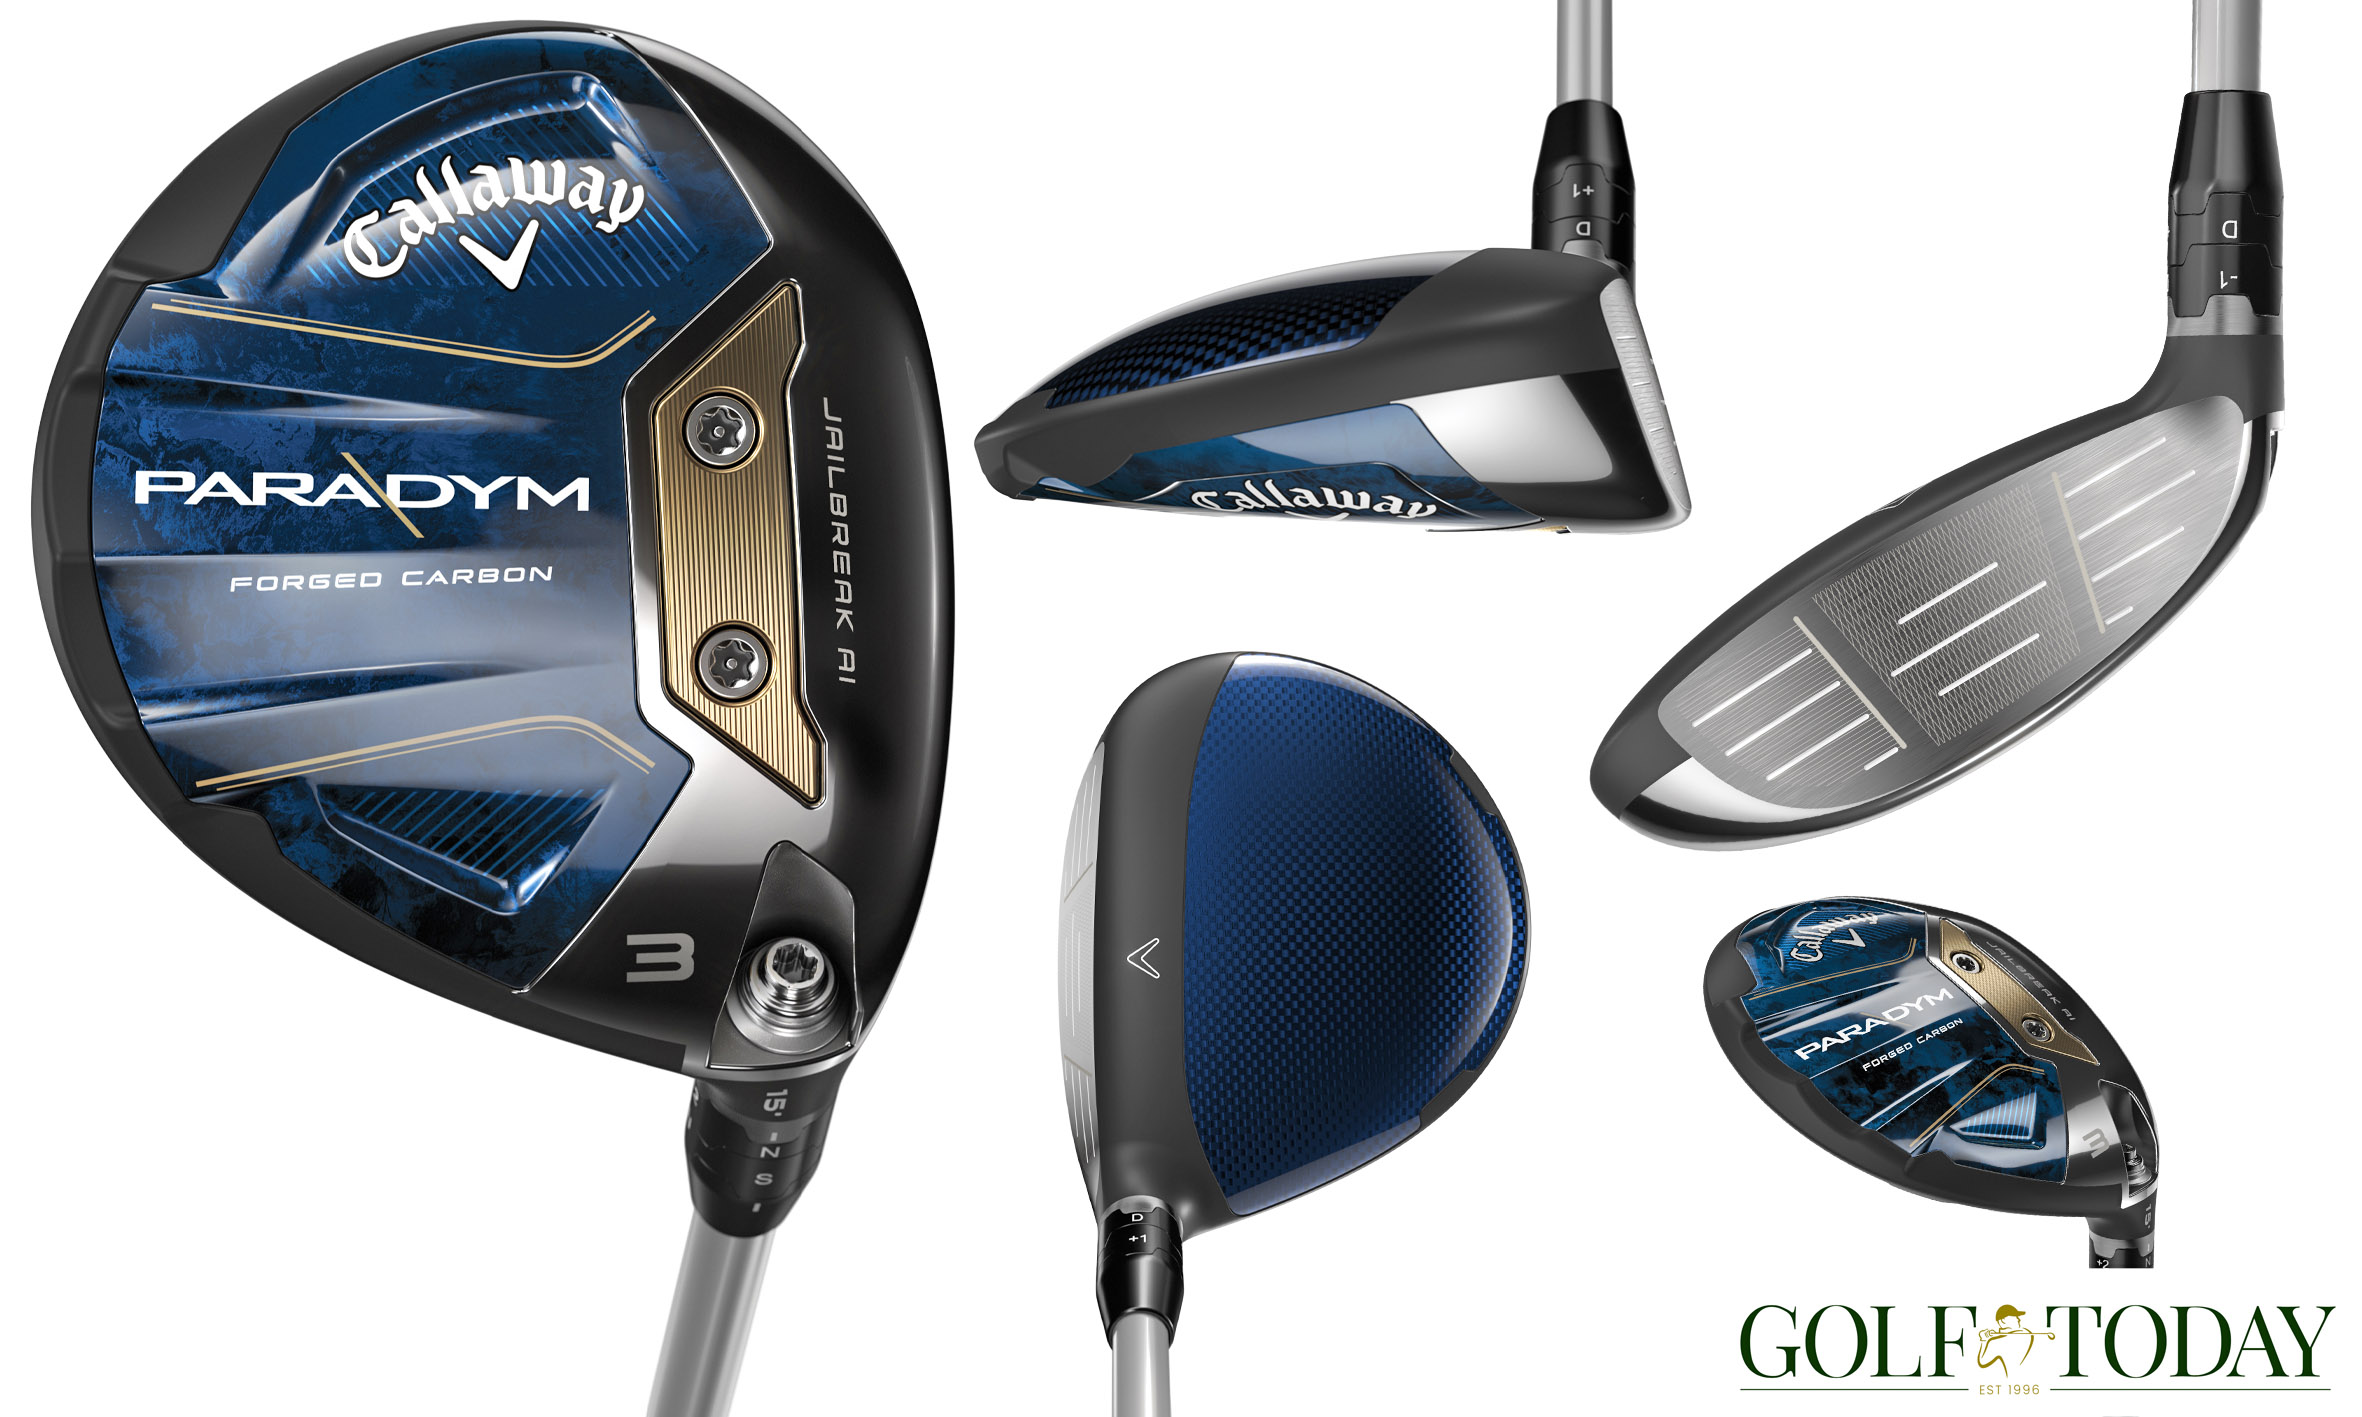 Callaway Paradym - Carbon sole at the cutting edge of what’s possible